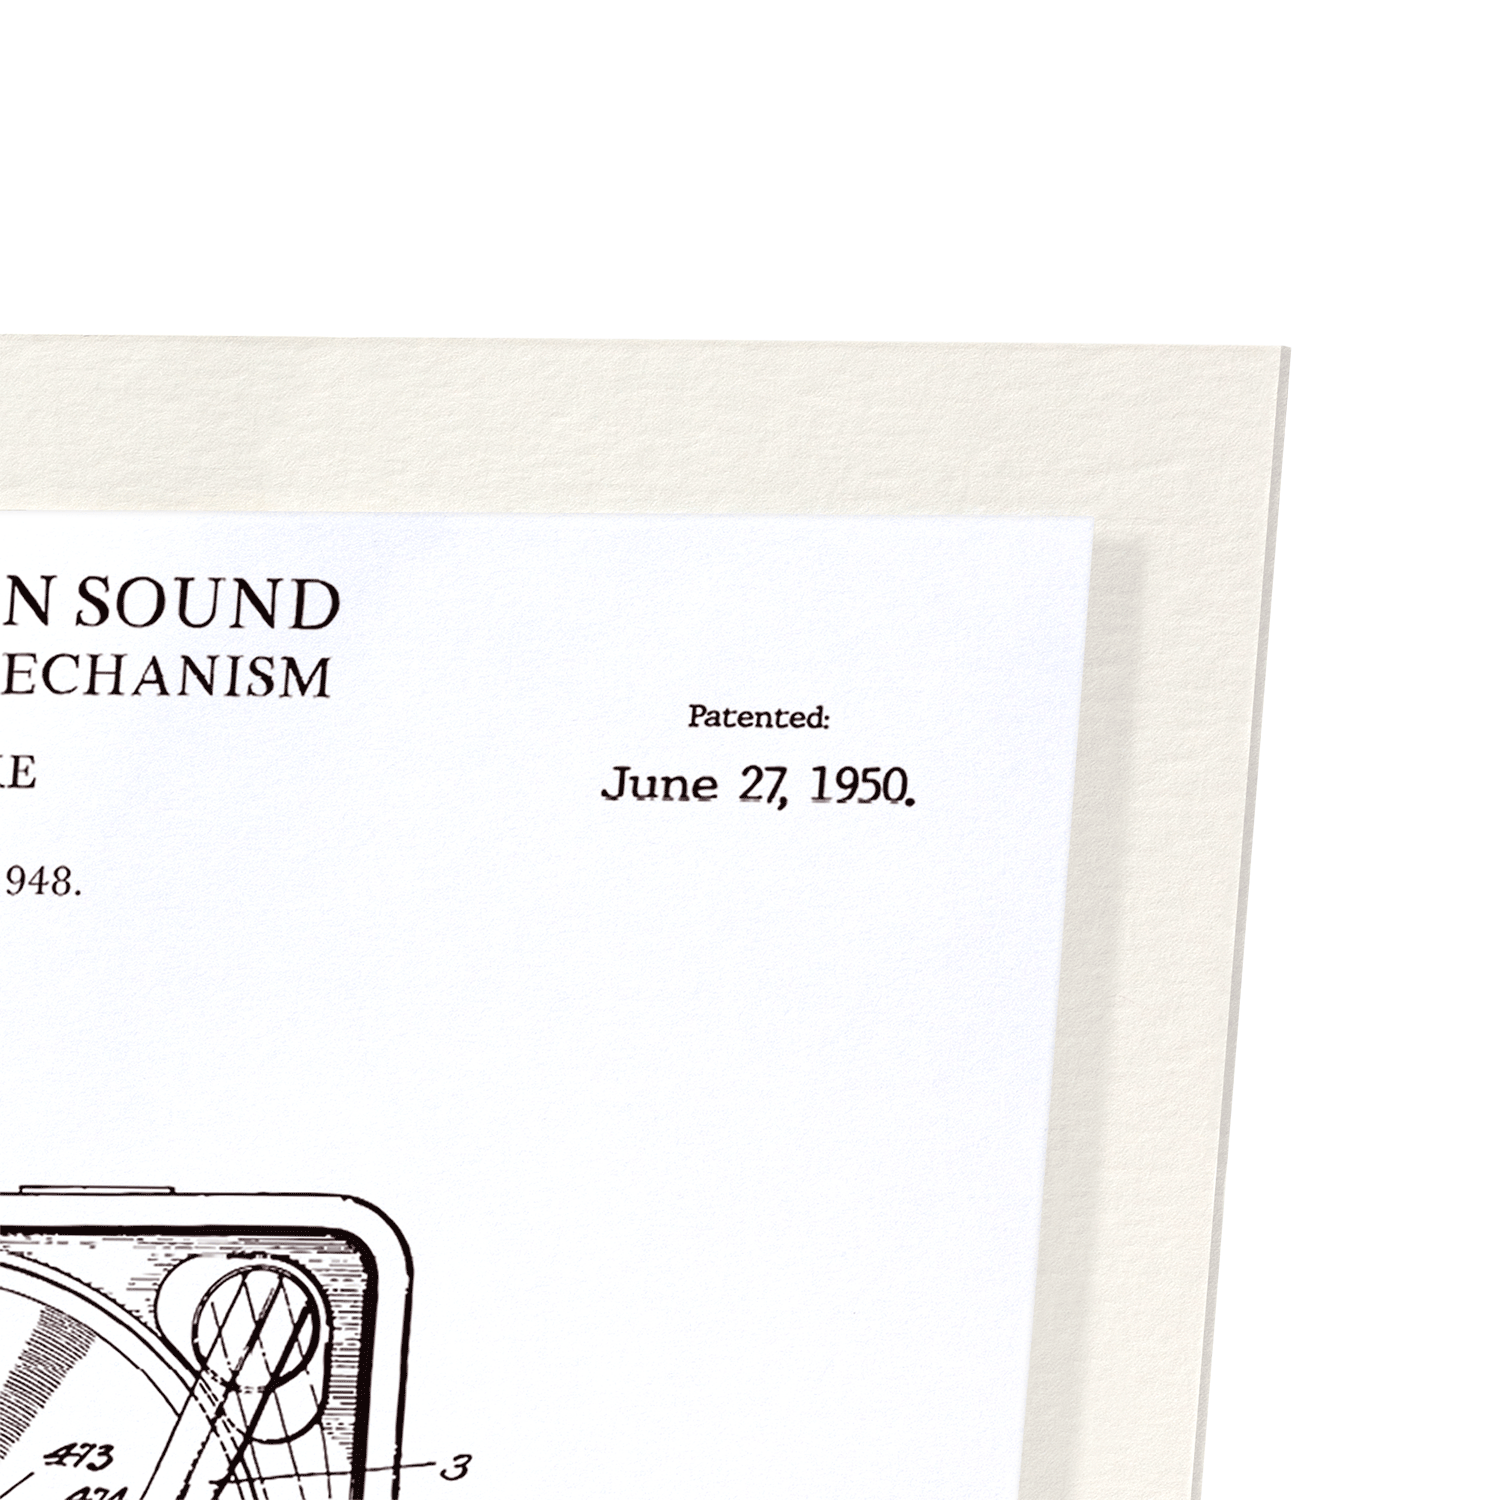 PATENT OF SOUND AND PICTURE MECHANISM (1950)